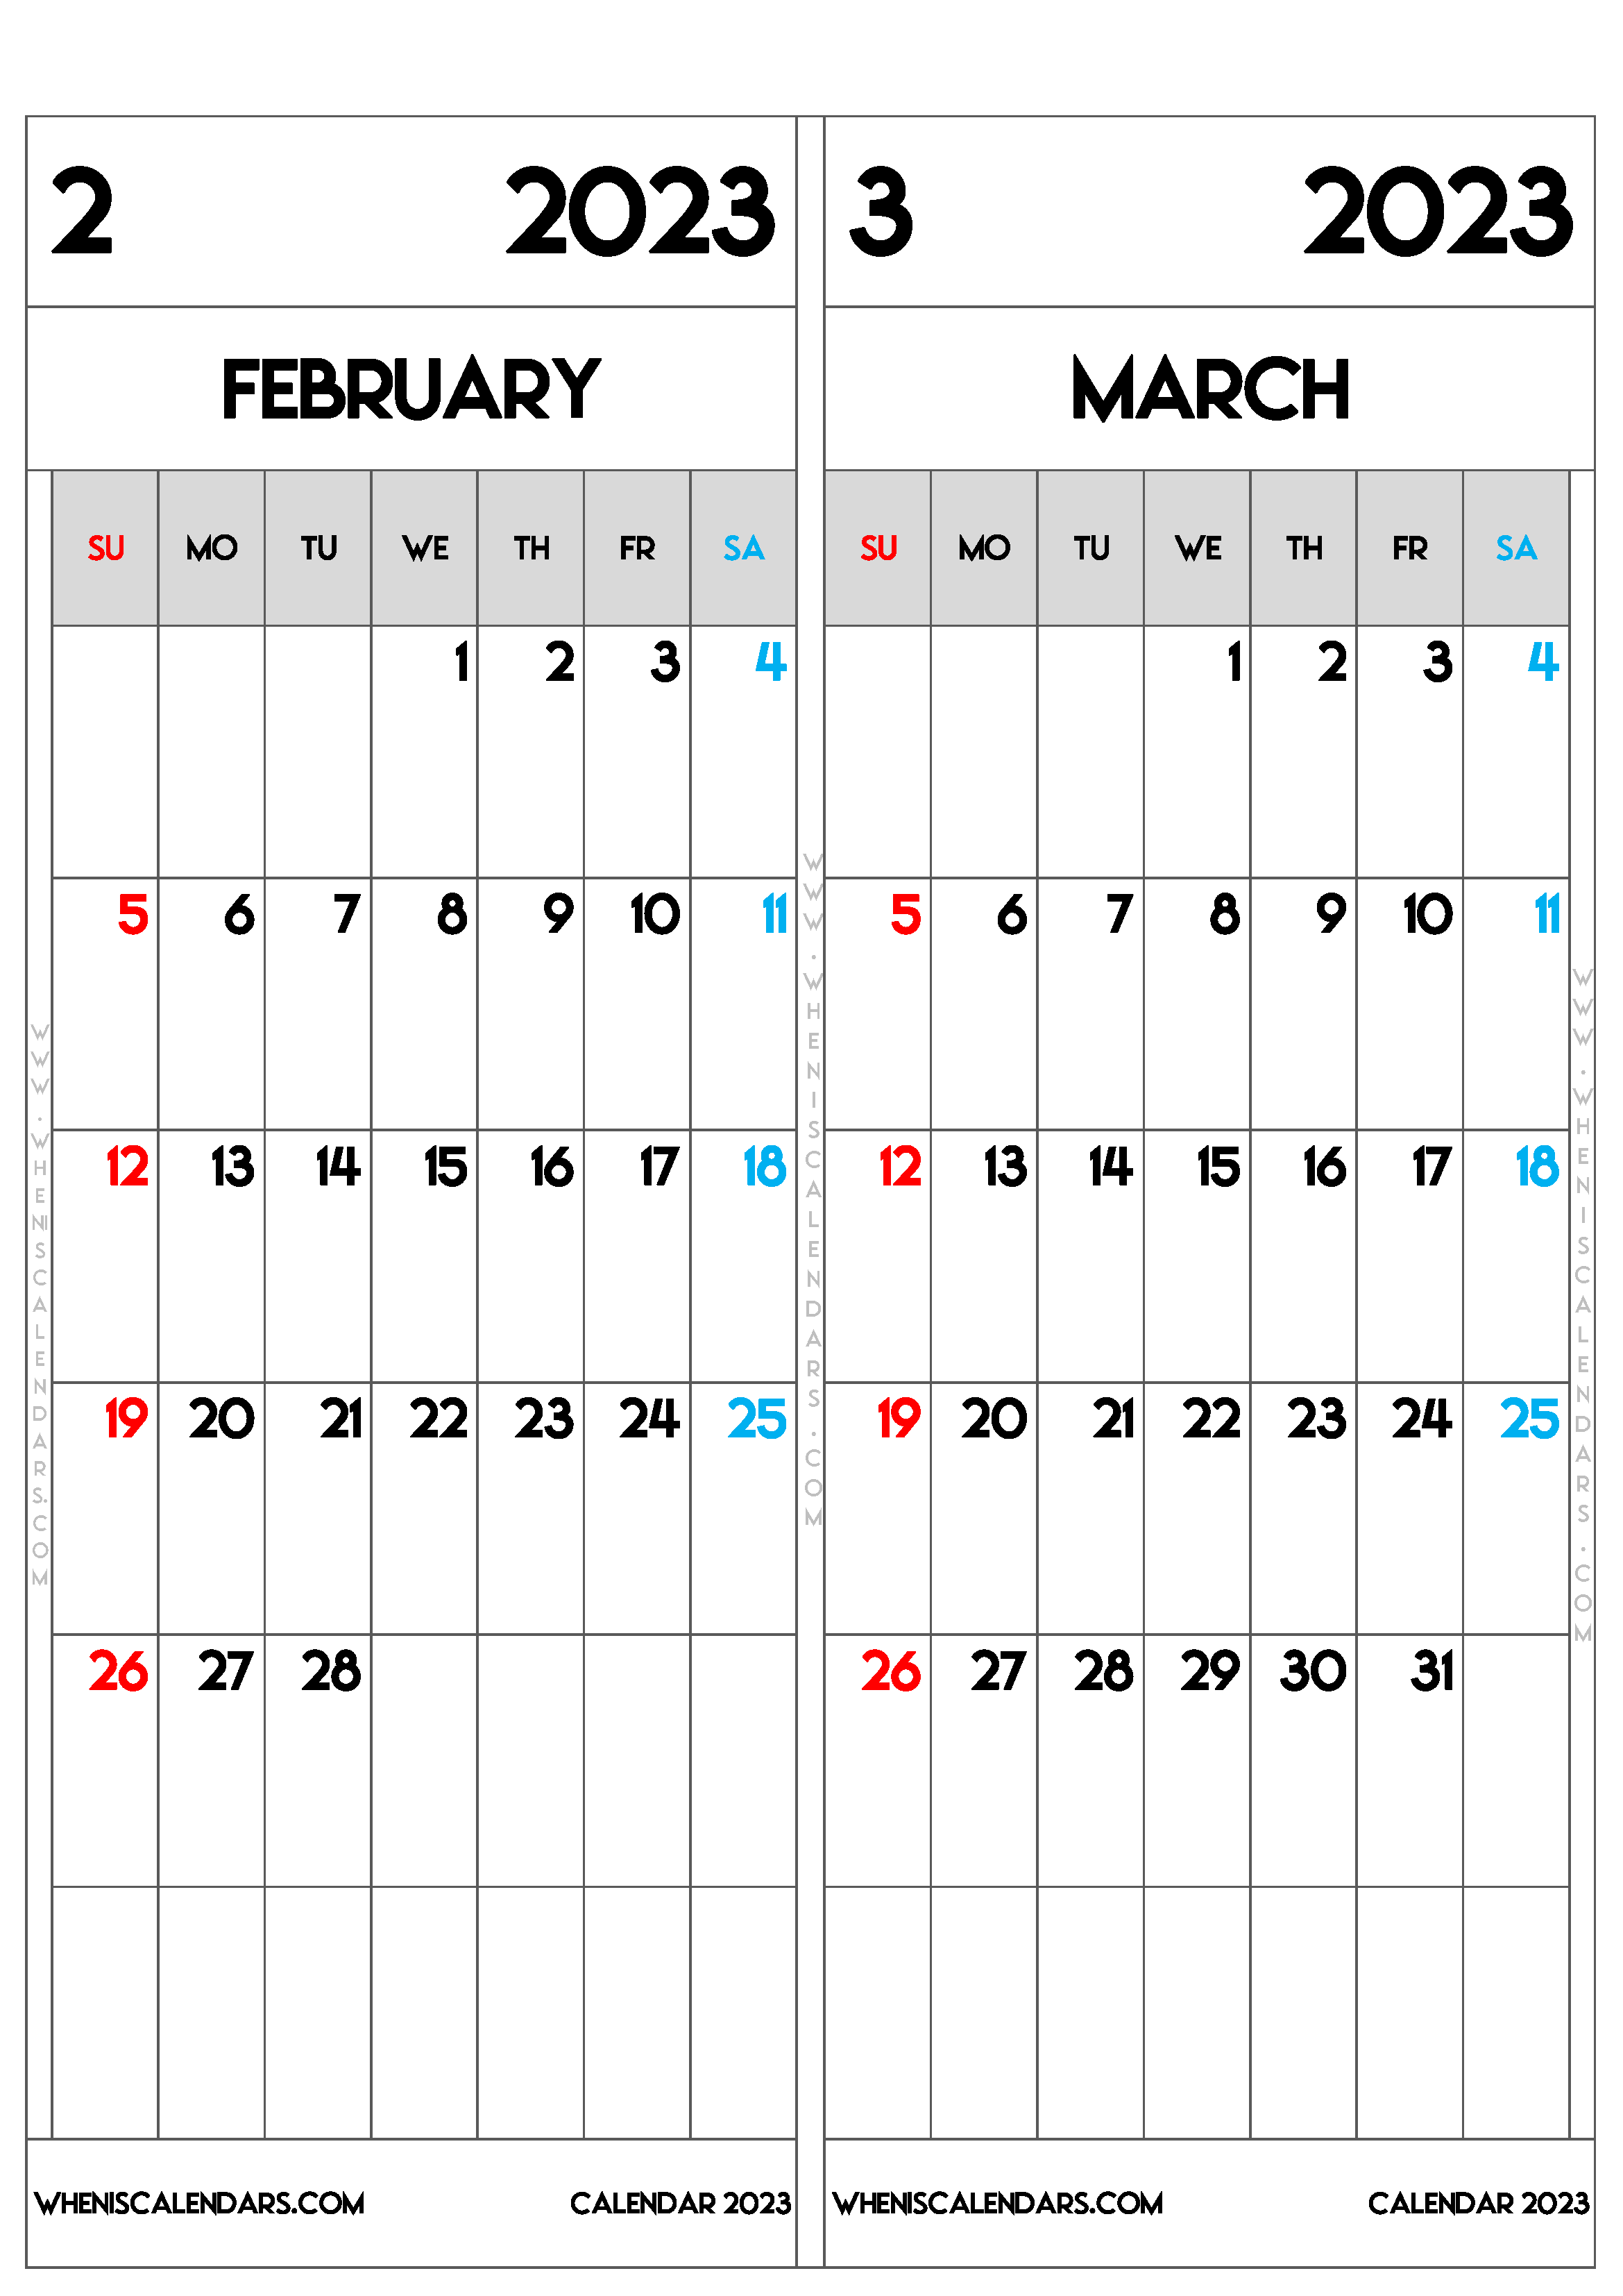 Download Free Printable February March 2023 Calendar Two Month per Page as PDF and PNG